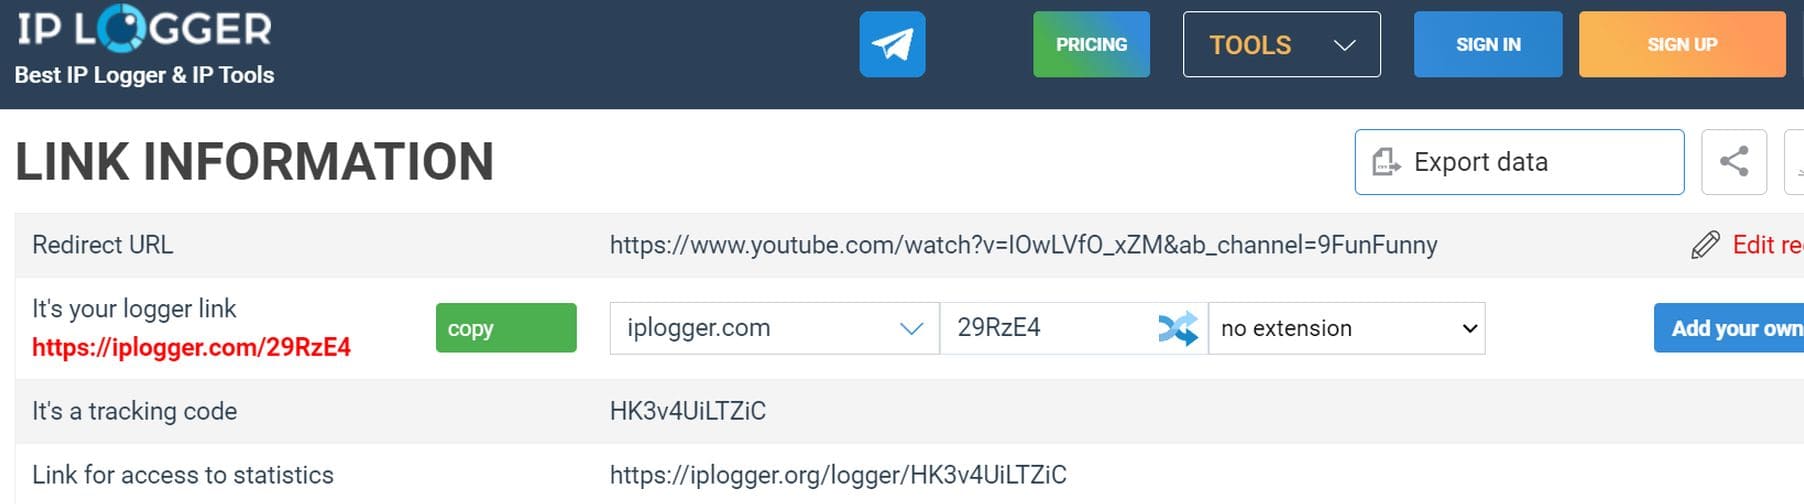 An image of a tracking link from IPlogger